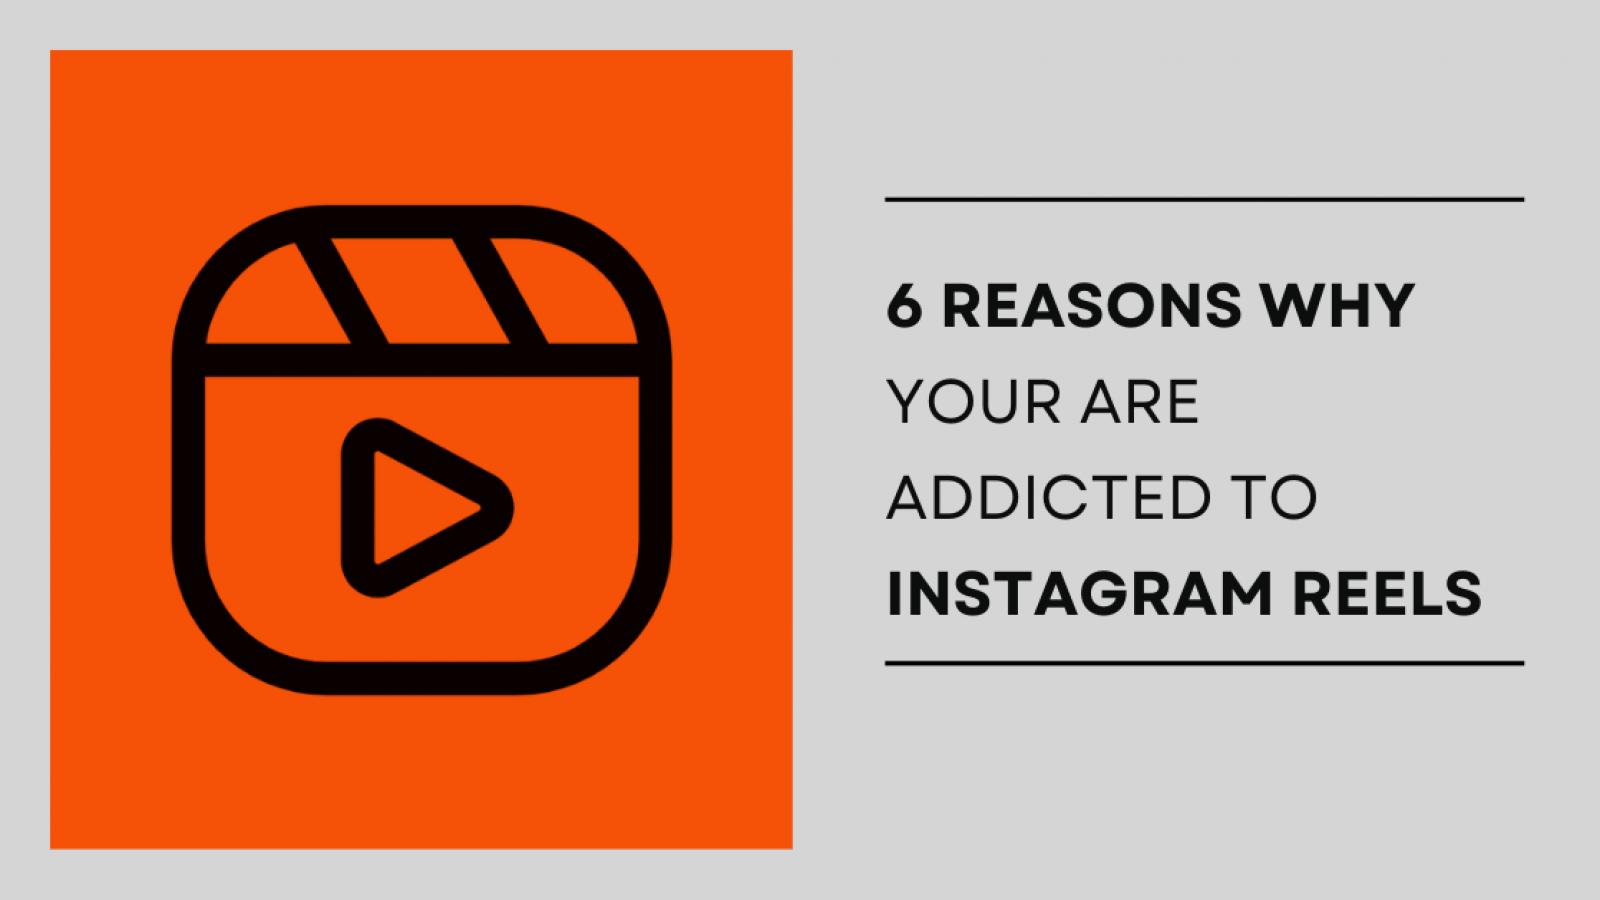 6 Reasons Why Your Are Addicted To Instagram Reels